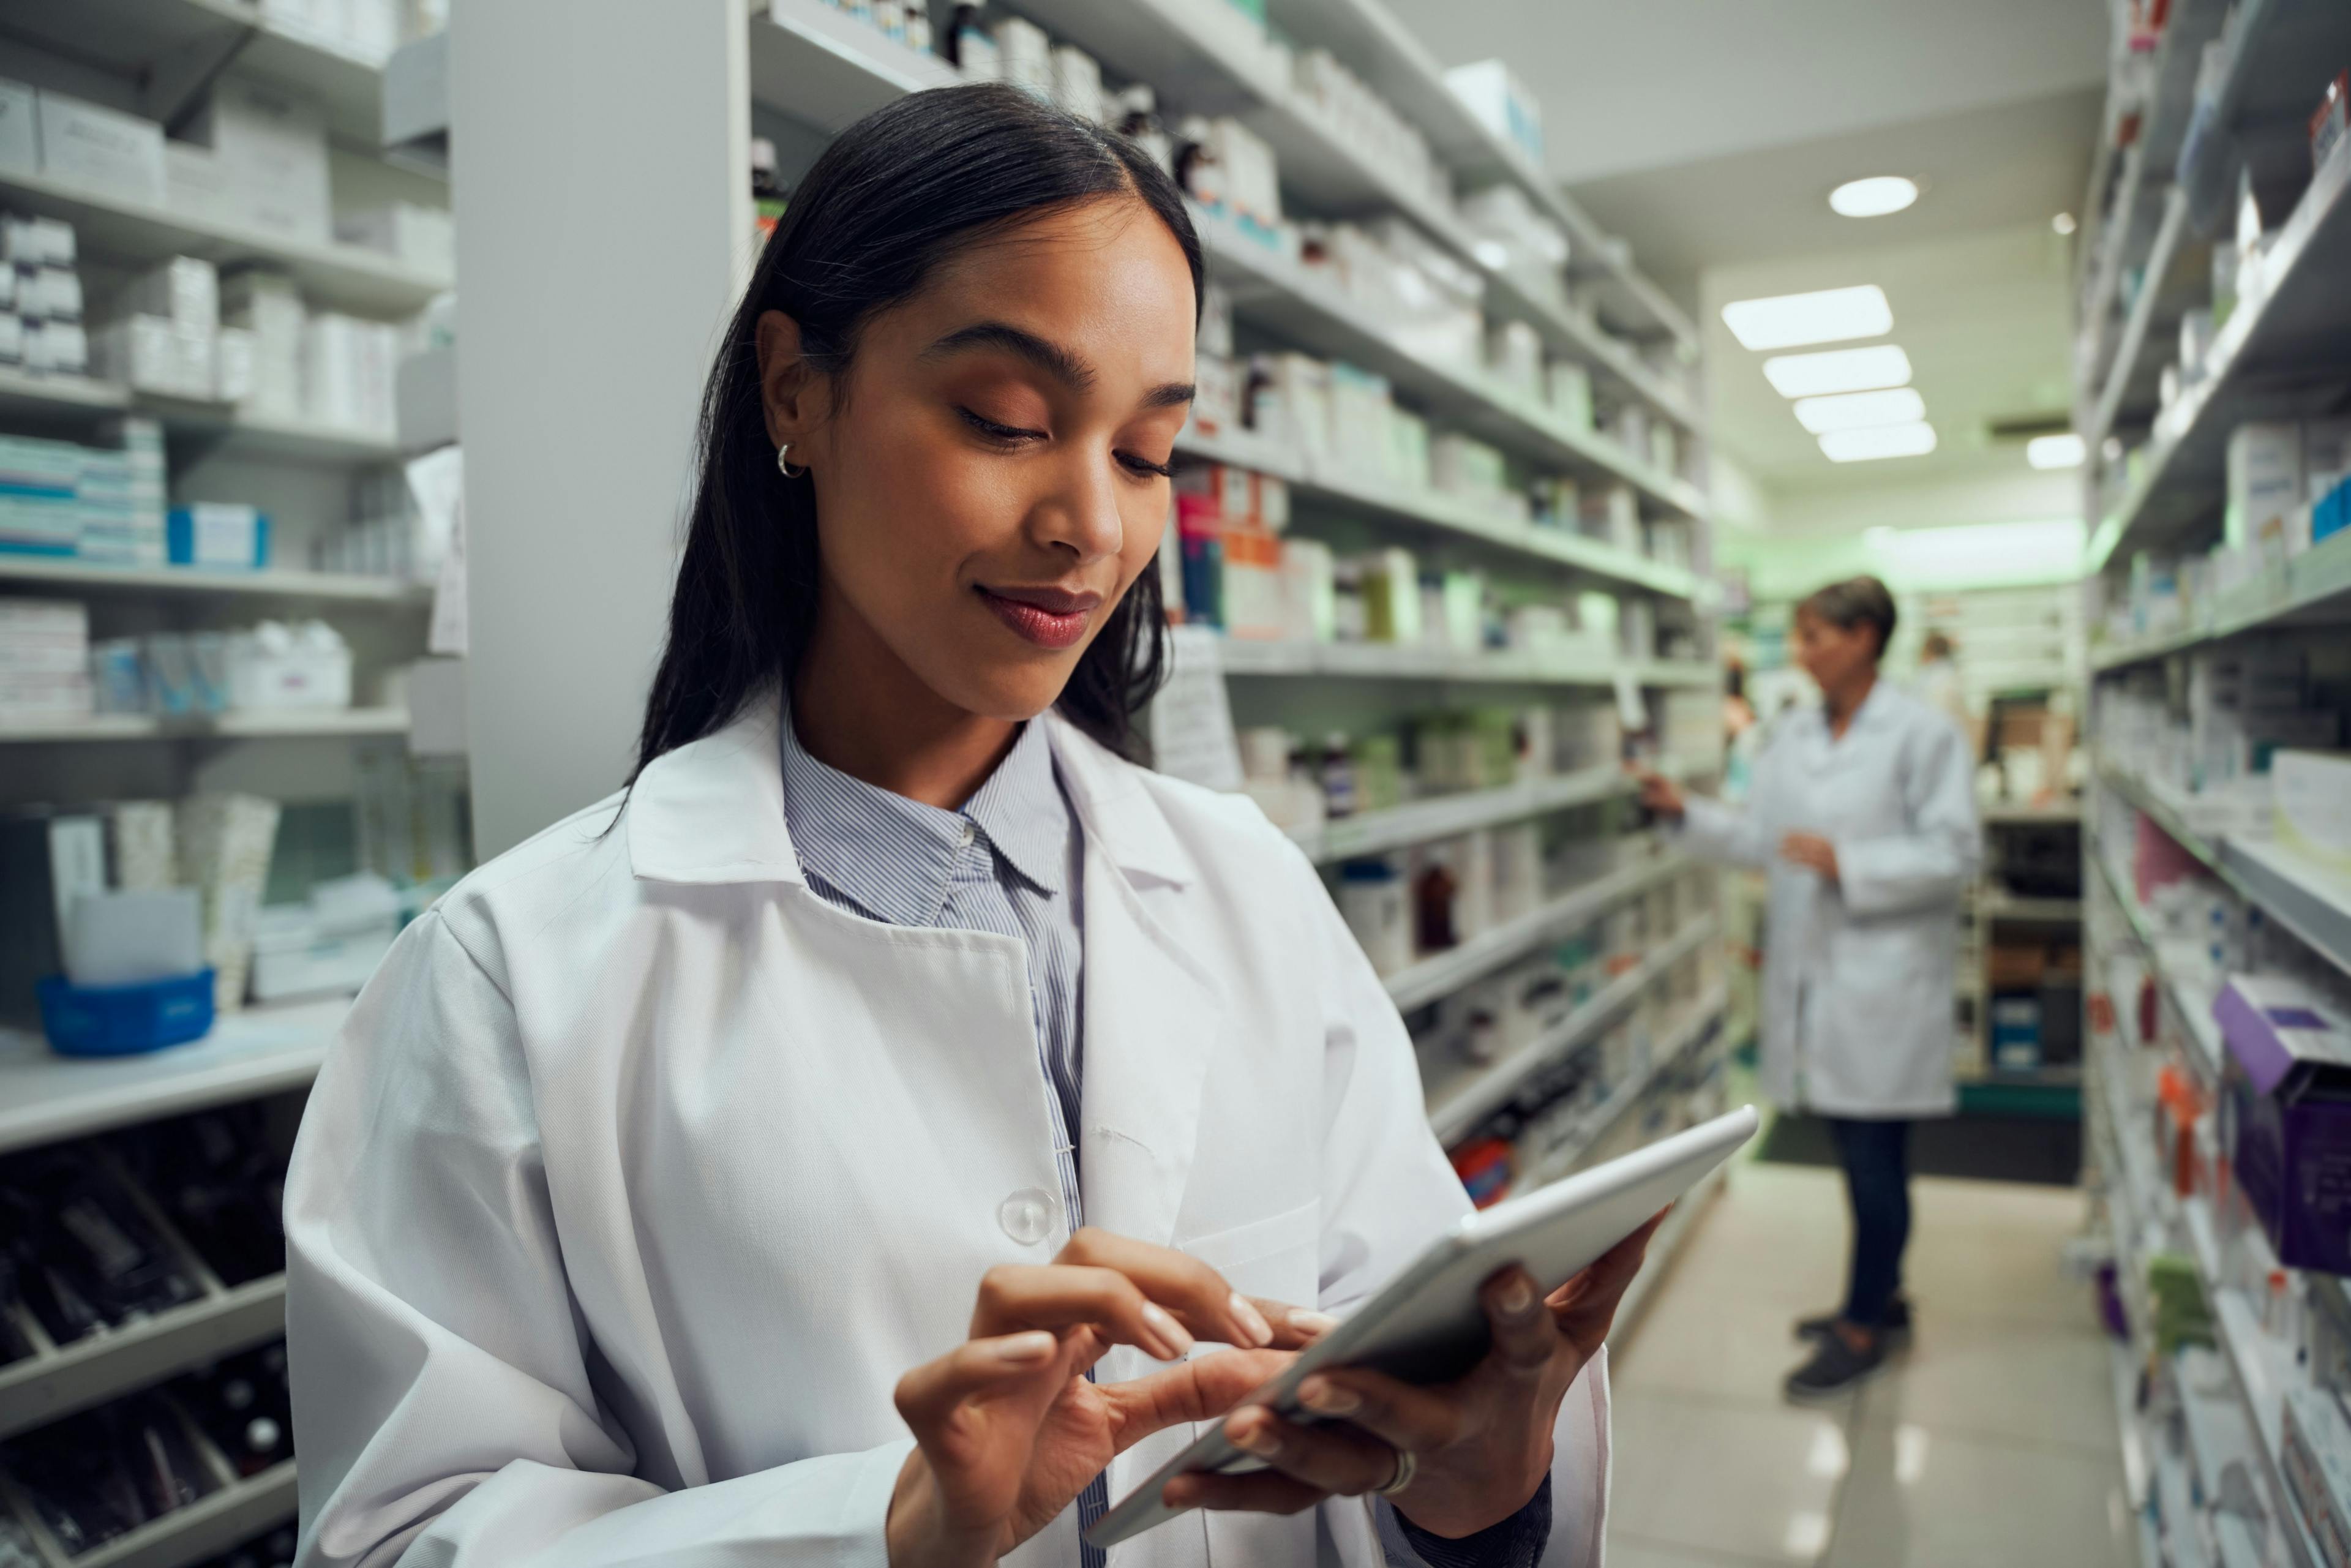 Smiling young female worker in pharmacy wearing labcoat checking inventory using digital tablet | Image Credit: StratfordProductions - stock.adobe.com